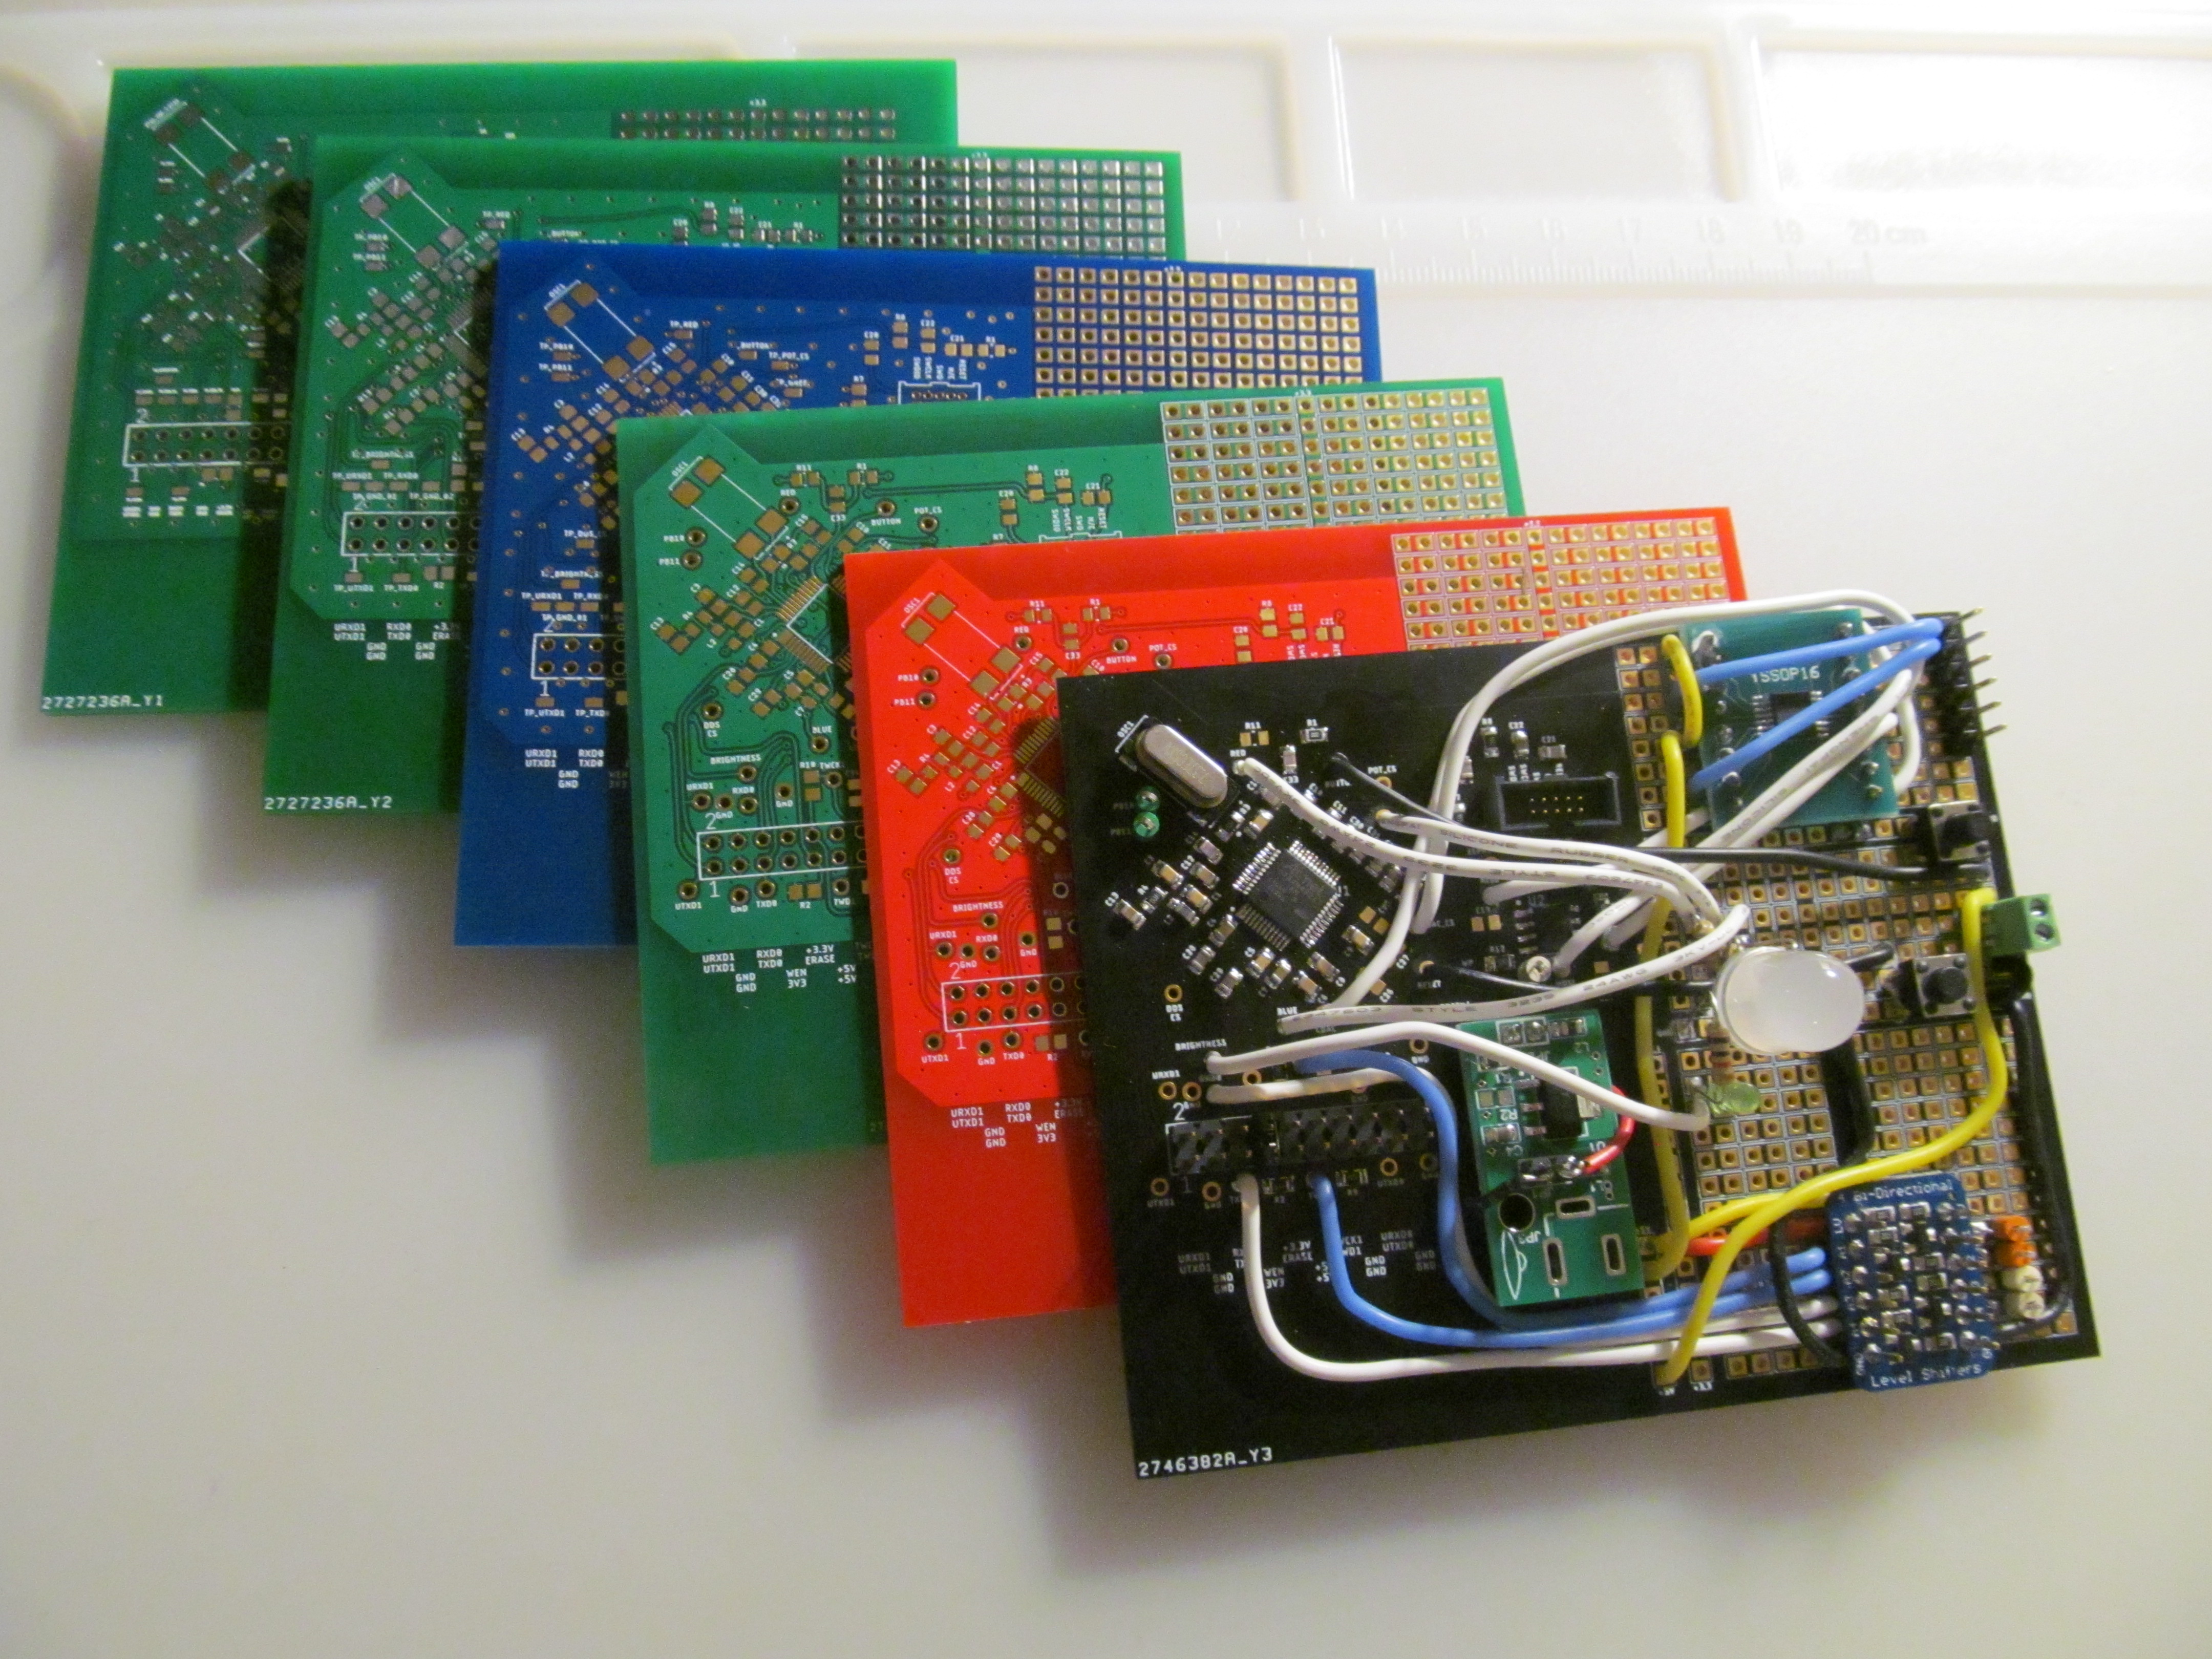 green, blue, red, and black printed circuit boards